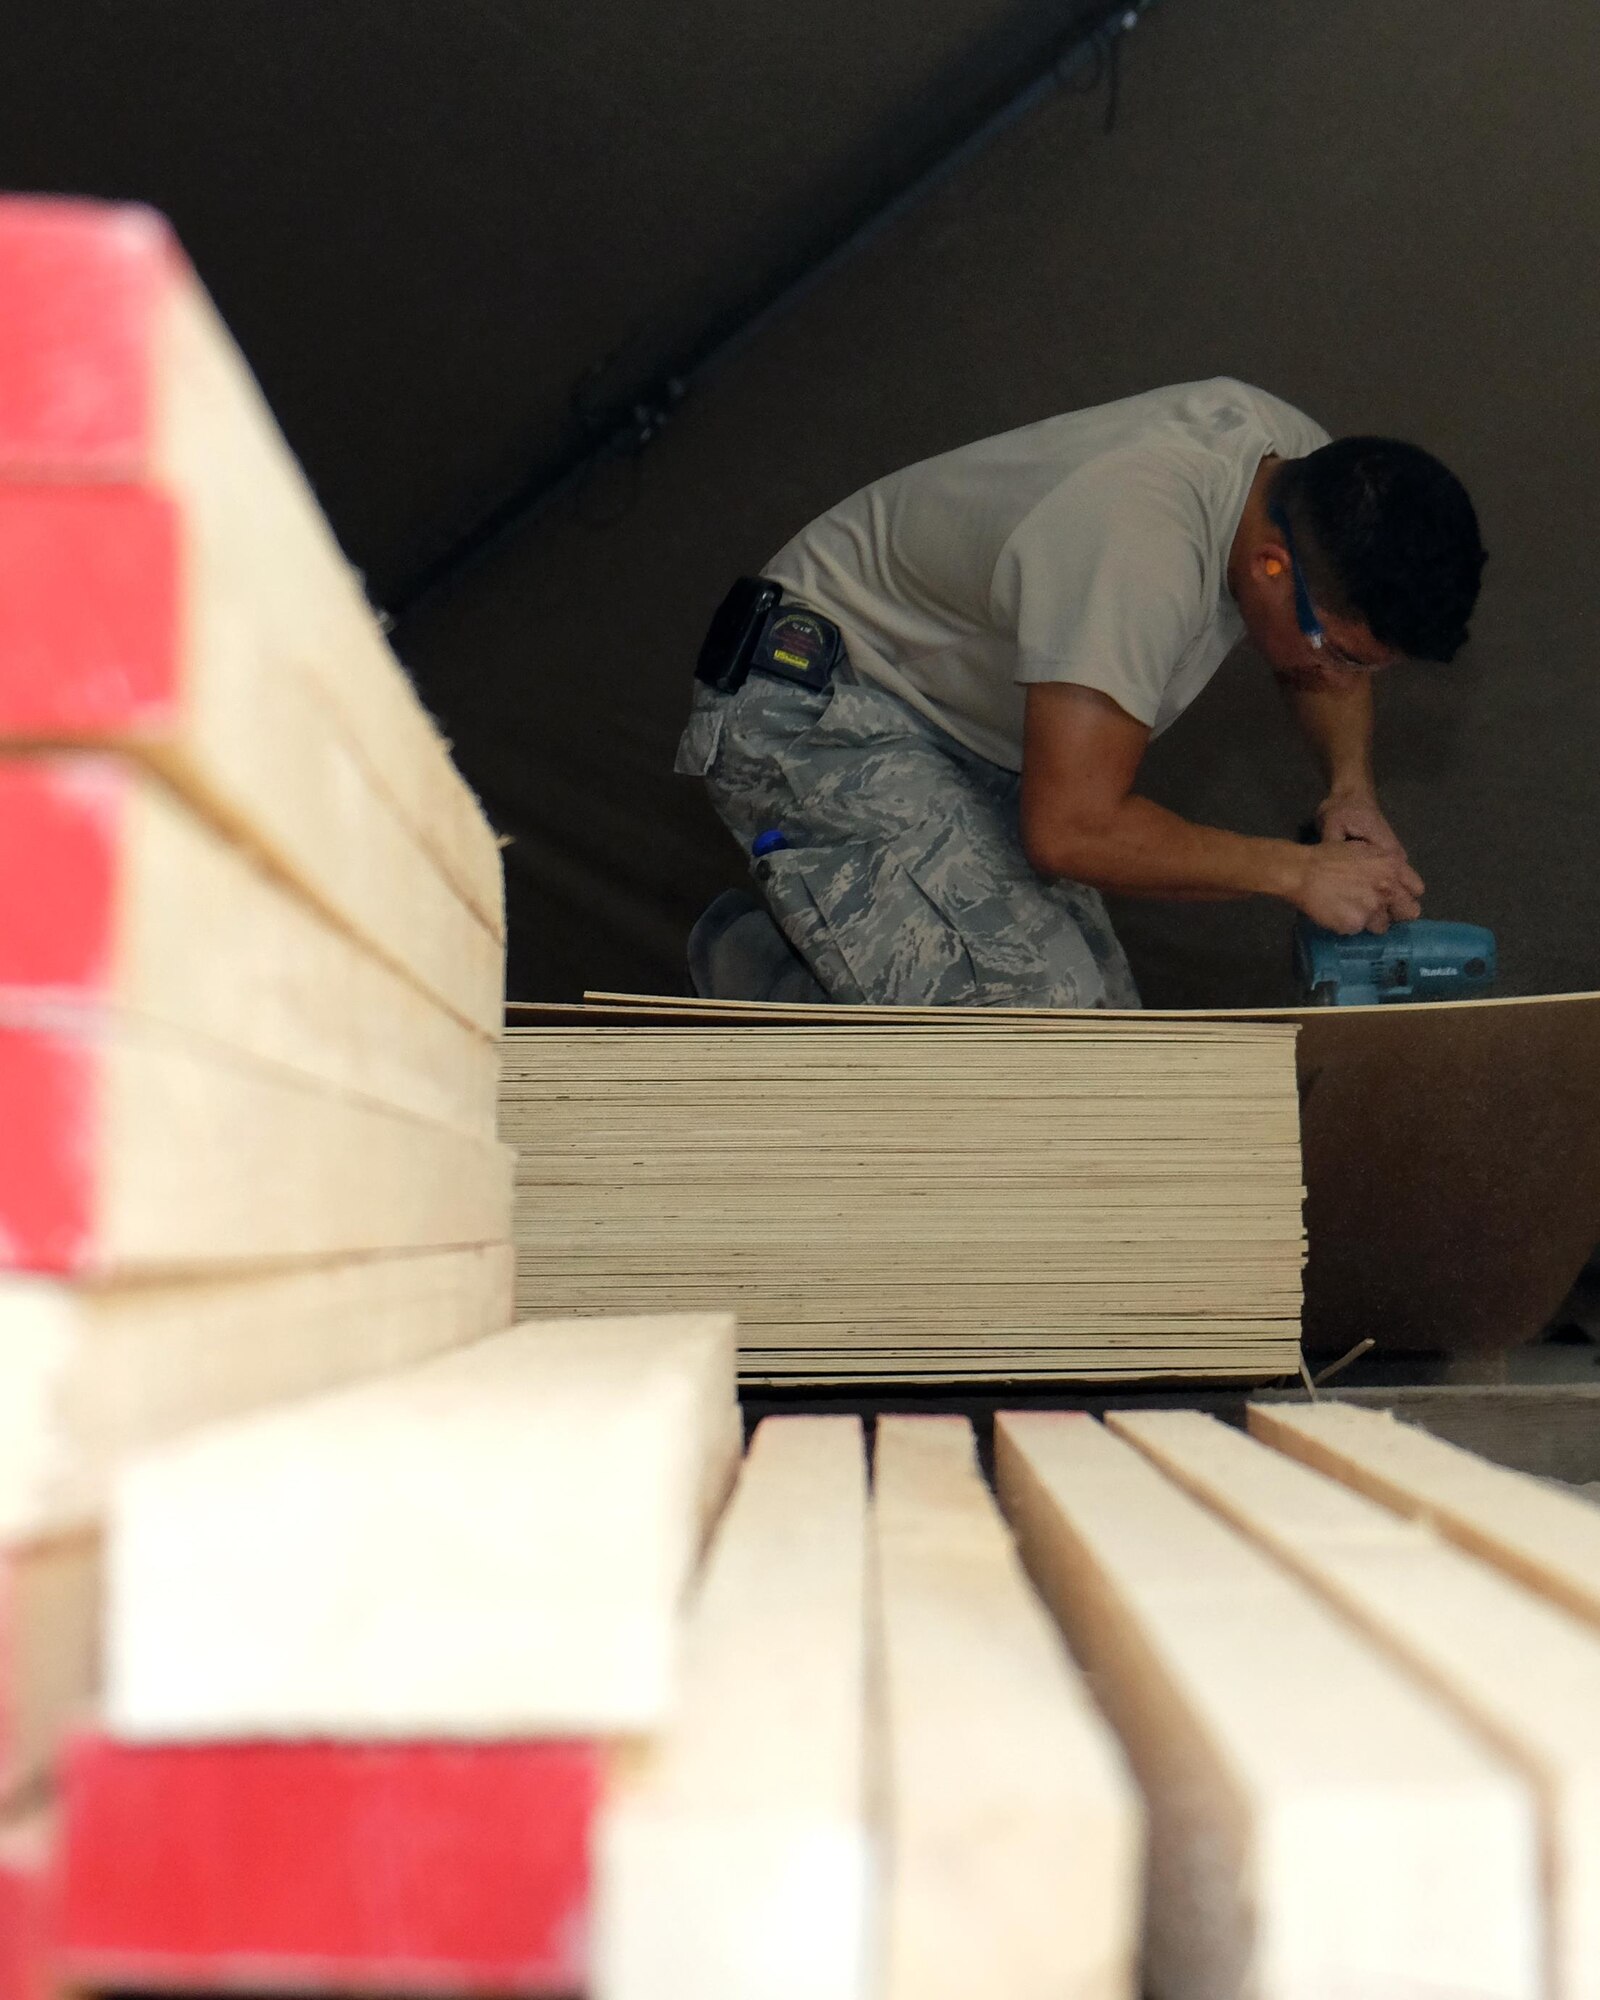 Airman 1st Class El John Julius, 380th Expeditionary Civil Engineer Squadron carpenter, cuts lumber May 16, 2017, at an undisclosed location in southwest Asia. The project provided the 727th Expeditionary Air Control Squadron with new offices. (U.S. Air Force photo by Senior Airman Preston Webb)